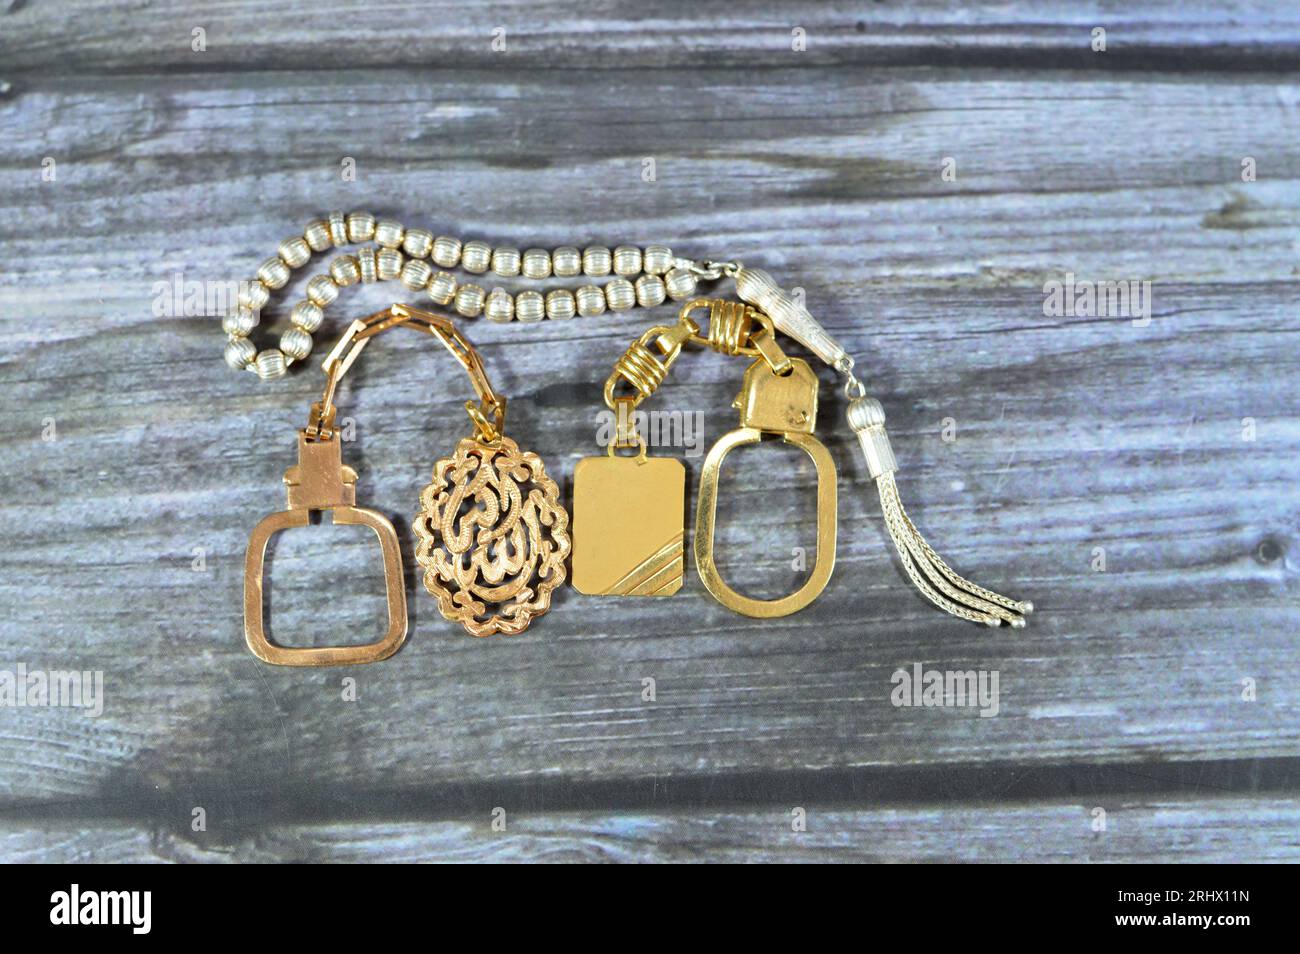 A silver rosary and golden keyring medals made of gold karat 18 with an Arabic text on one of them Allahu Akbar translation (God is the greatest), gol Stock Photo